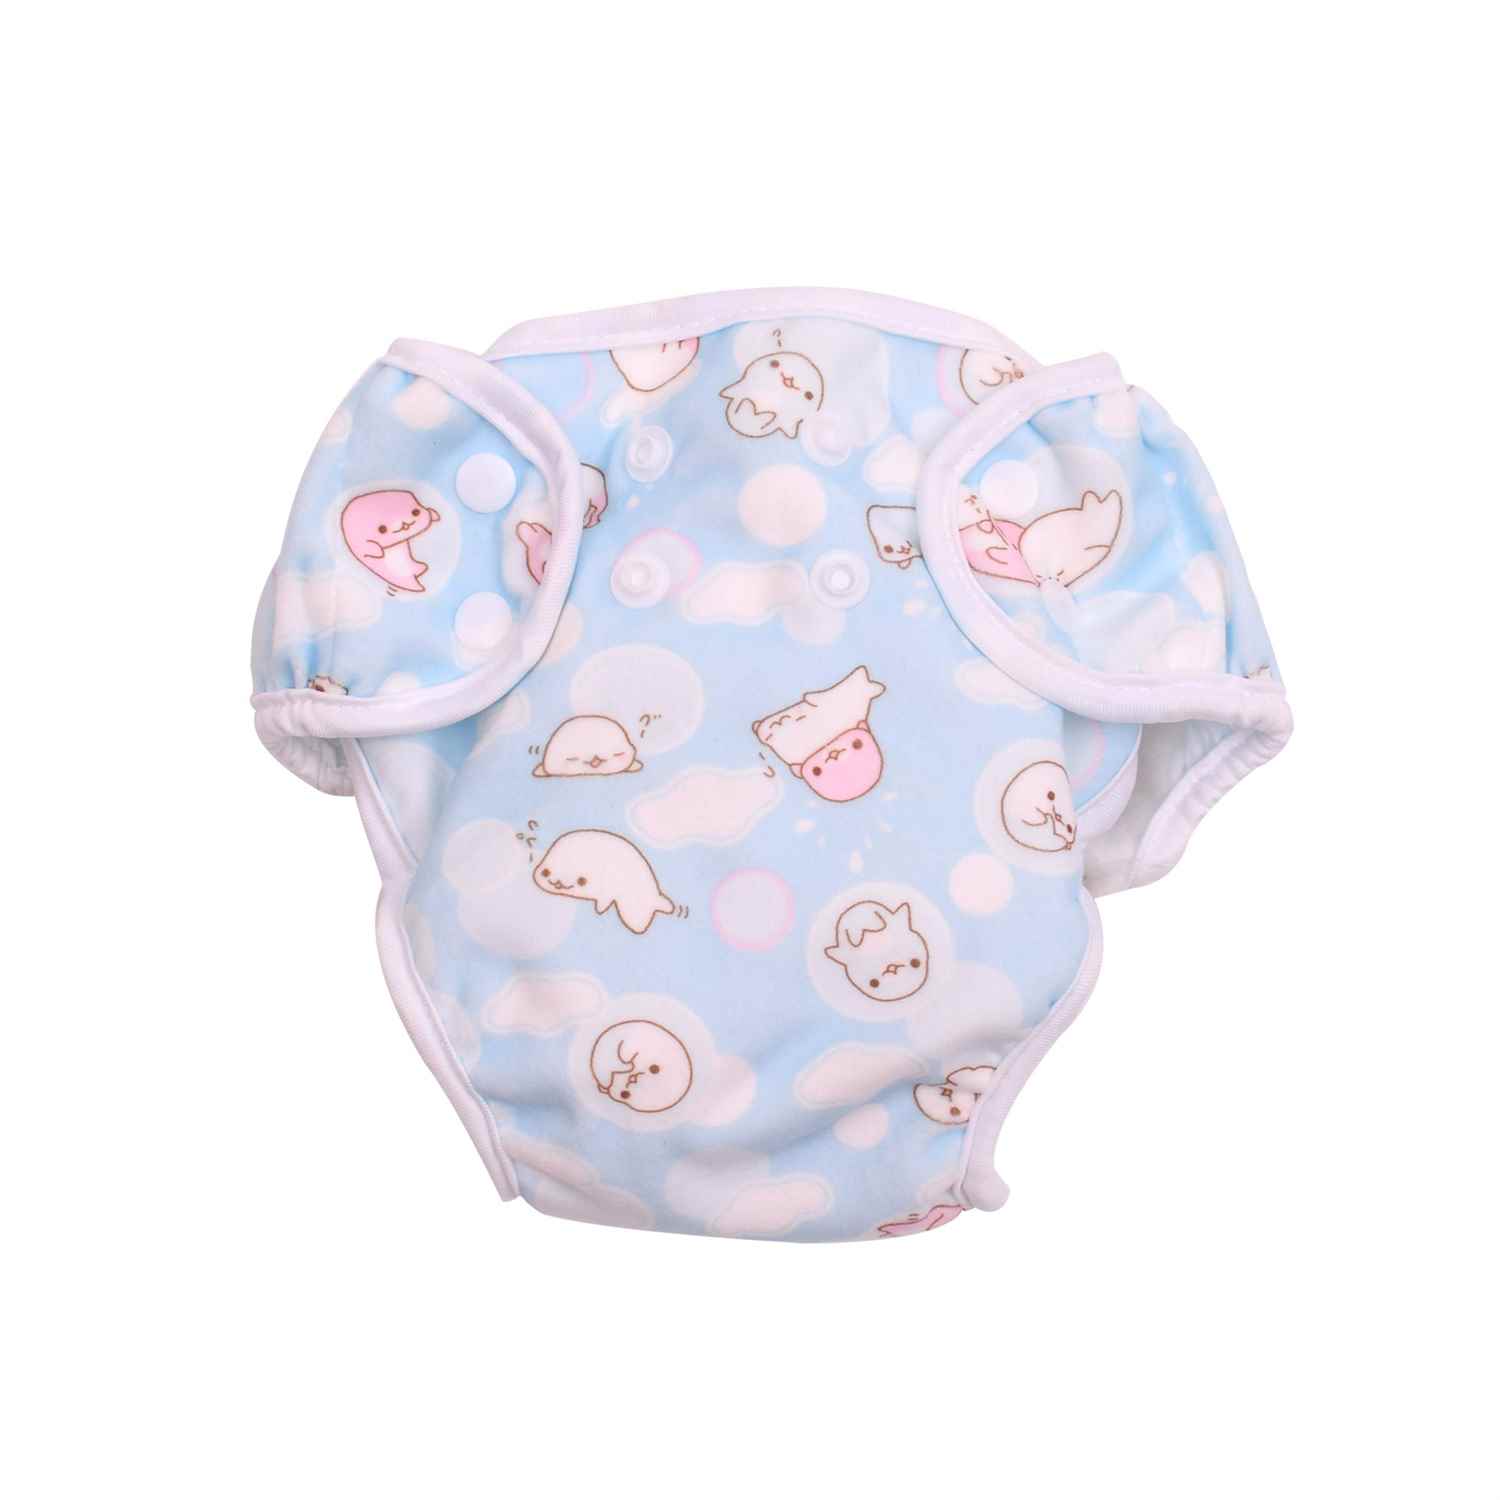 PAW PAW Baby Reusable Fabric Diaper with Pad, Size XL (10-14kg)-Blue